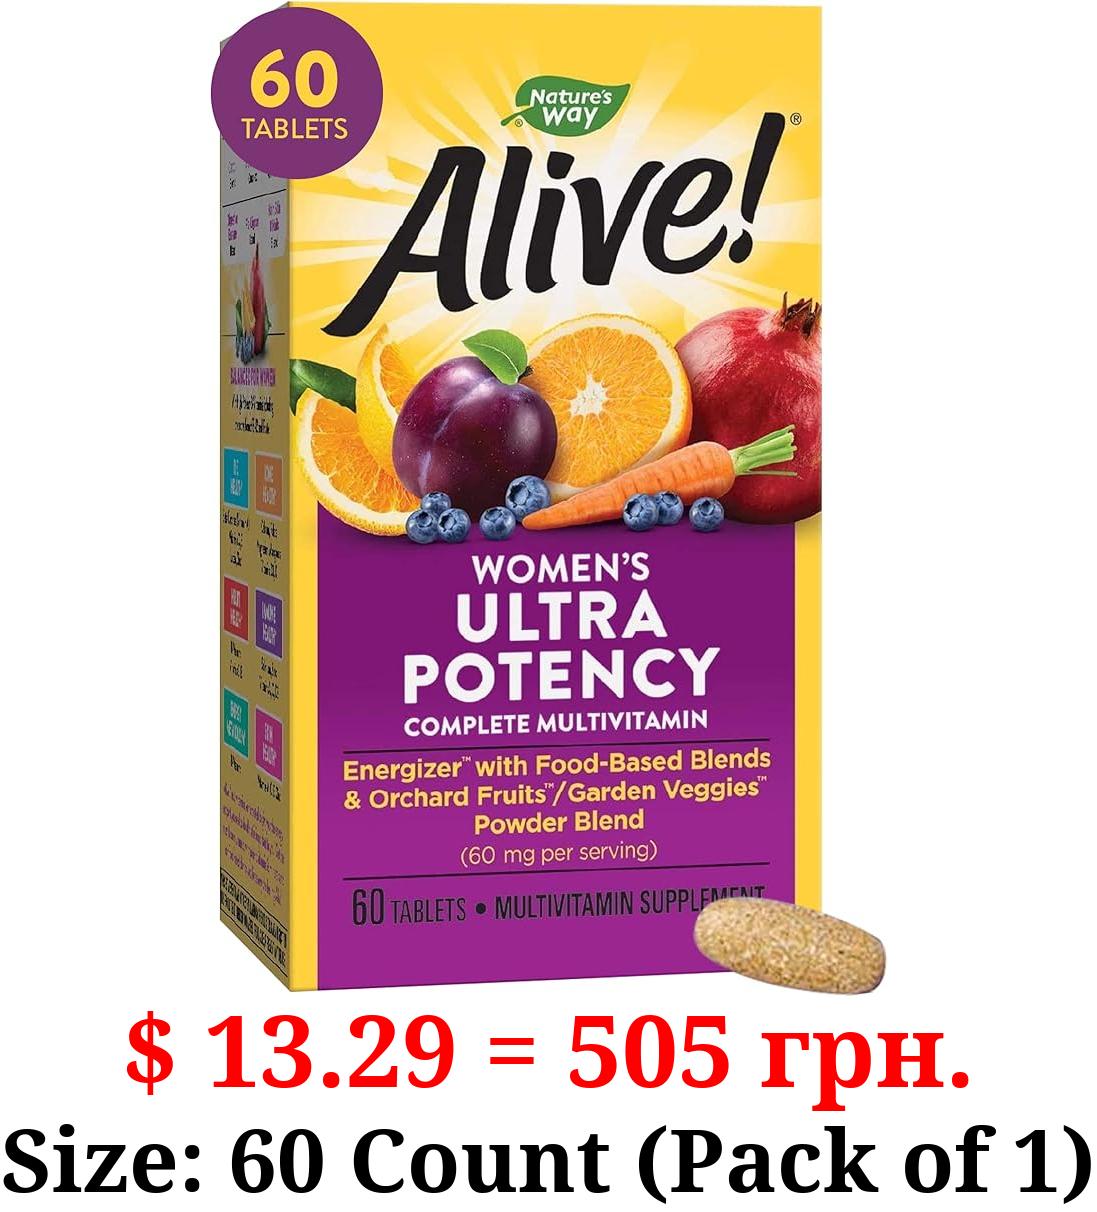 Nature's Way Alive! Women's Ultra Potency Complete Multivitamin, High Potency B-Vitamins for Women, Energy Metabolism*, 60 Tablets